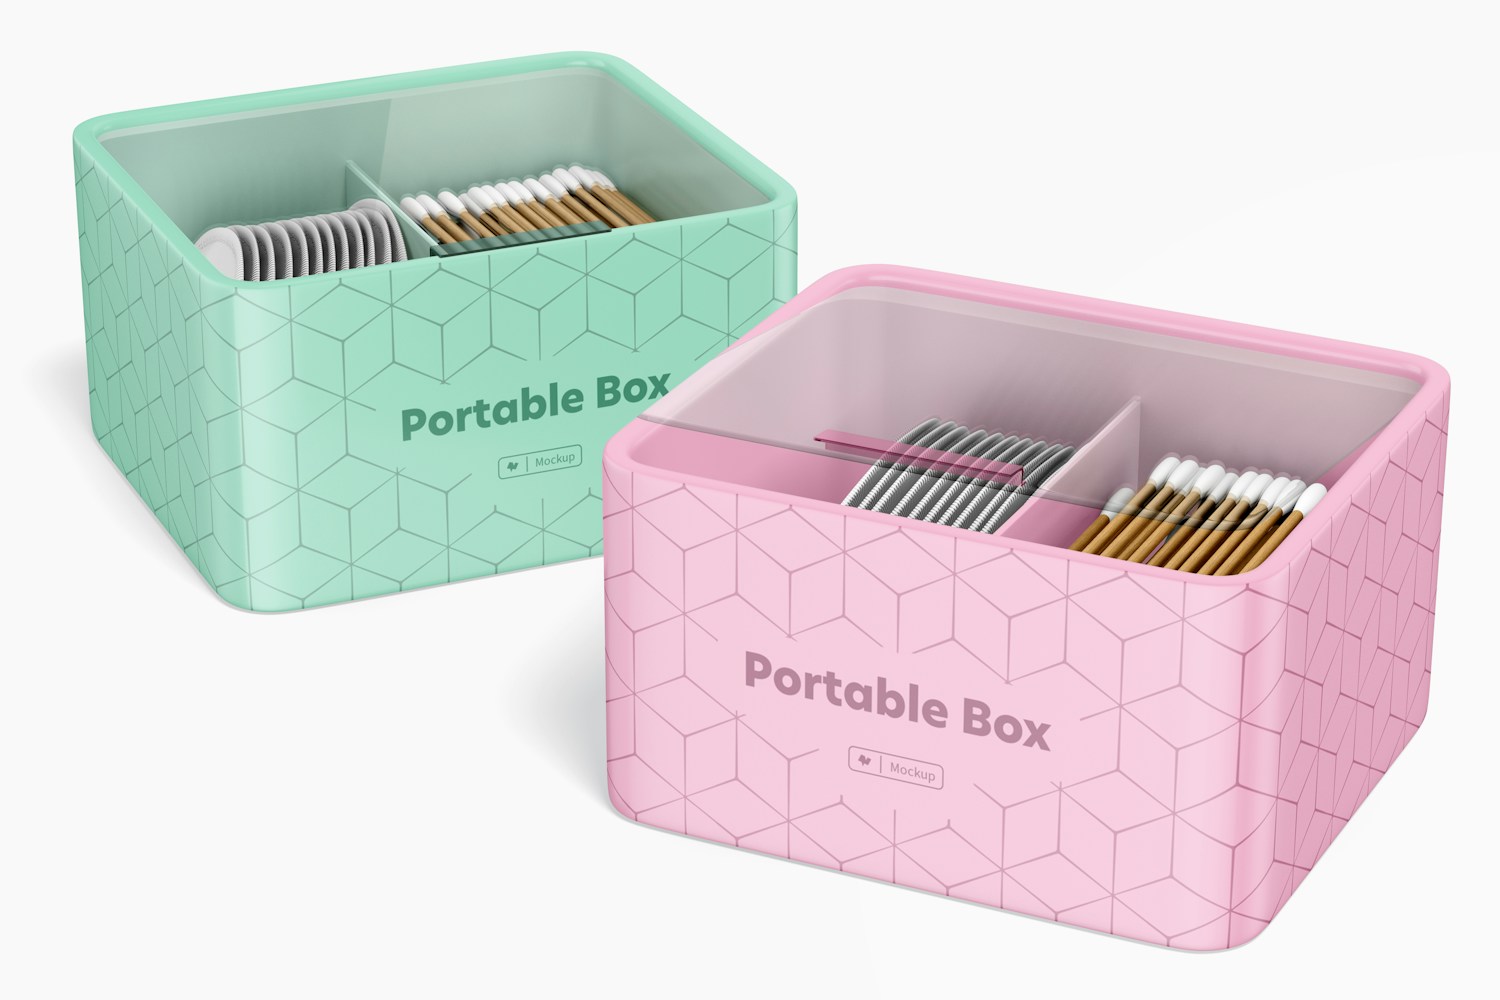 Portable Boxes with Clear Lid Mockup